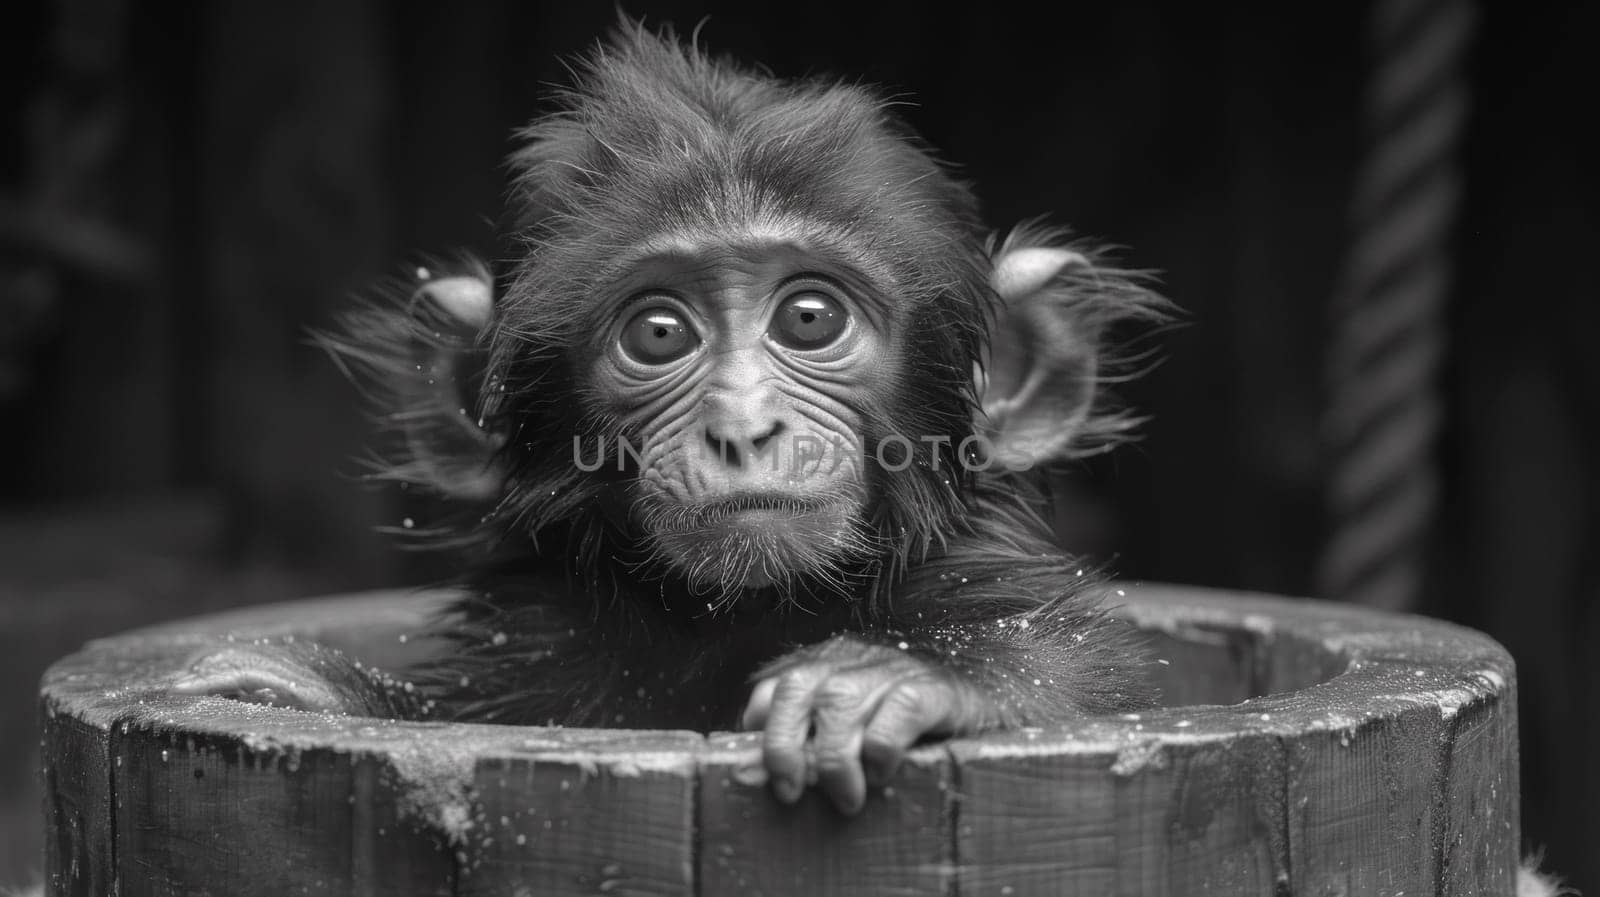 A baby monkey sitting in a wooden barrel with water, AI by starush